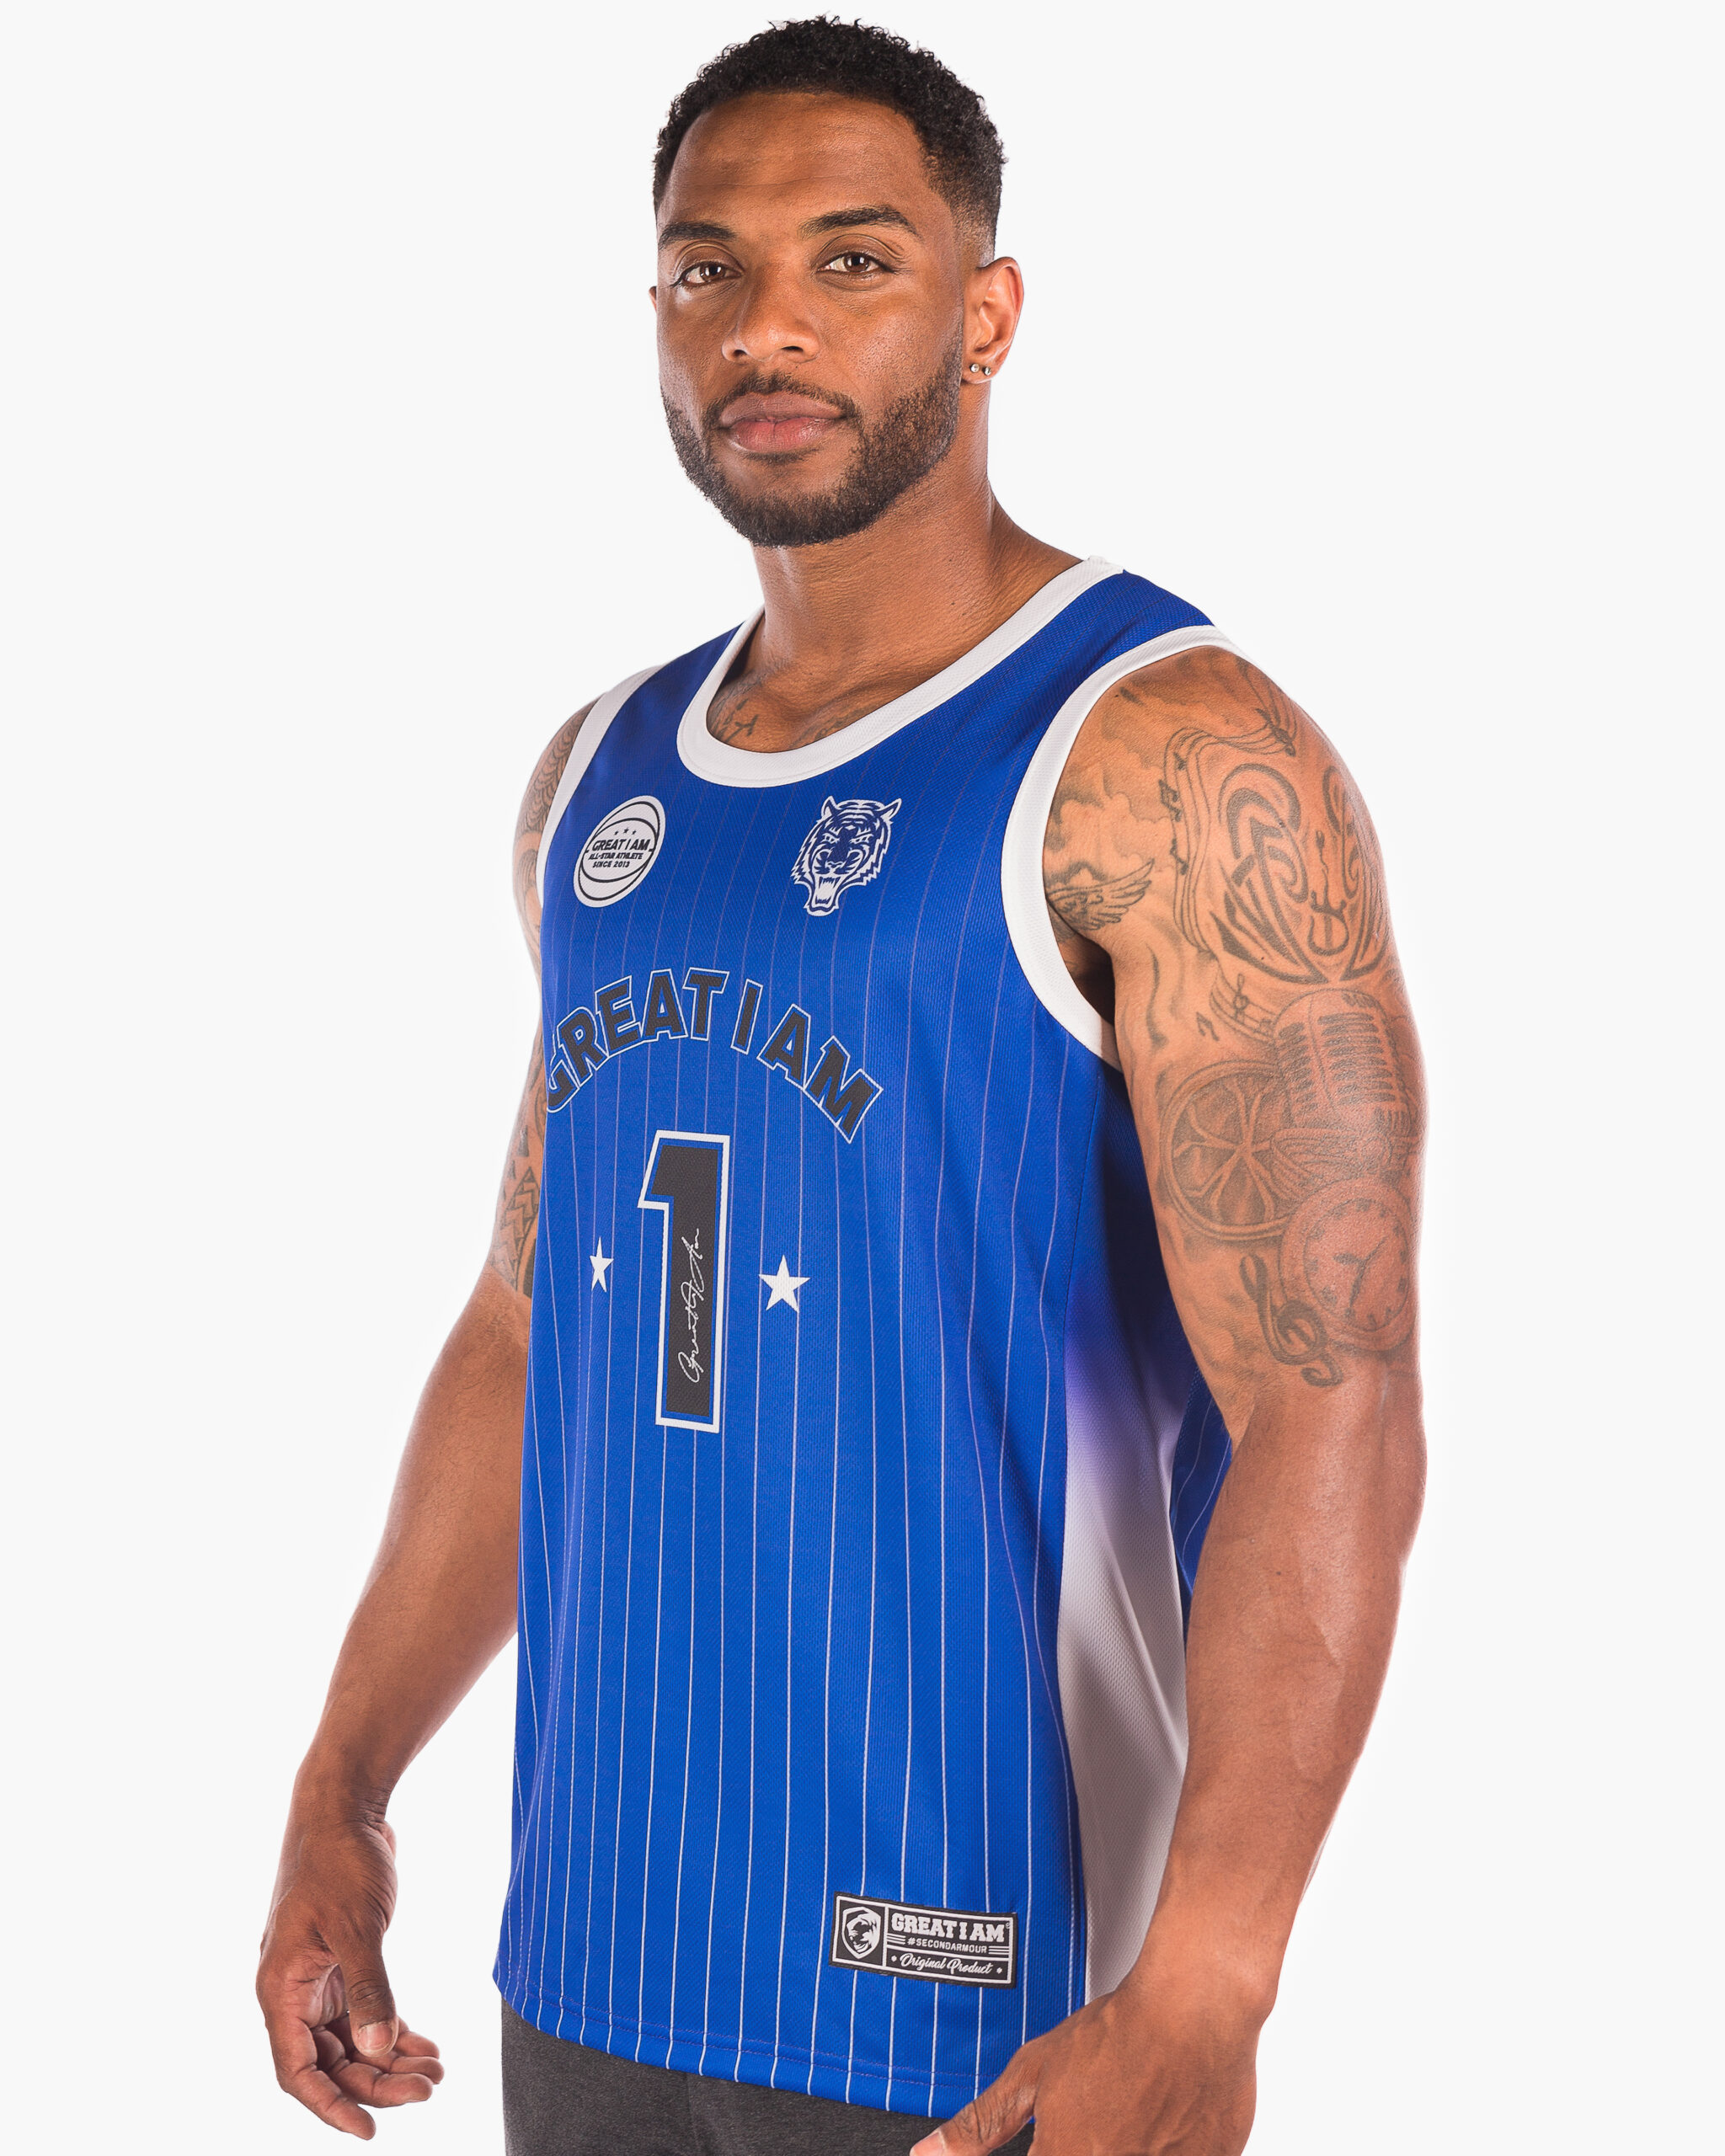 BASKETBALL JERSEY NUMBER 1 BLUE - Great I Am